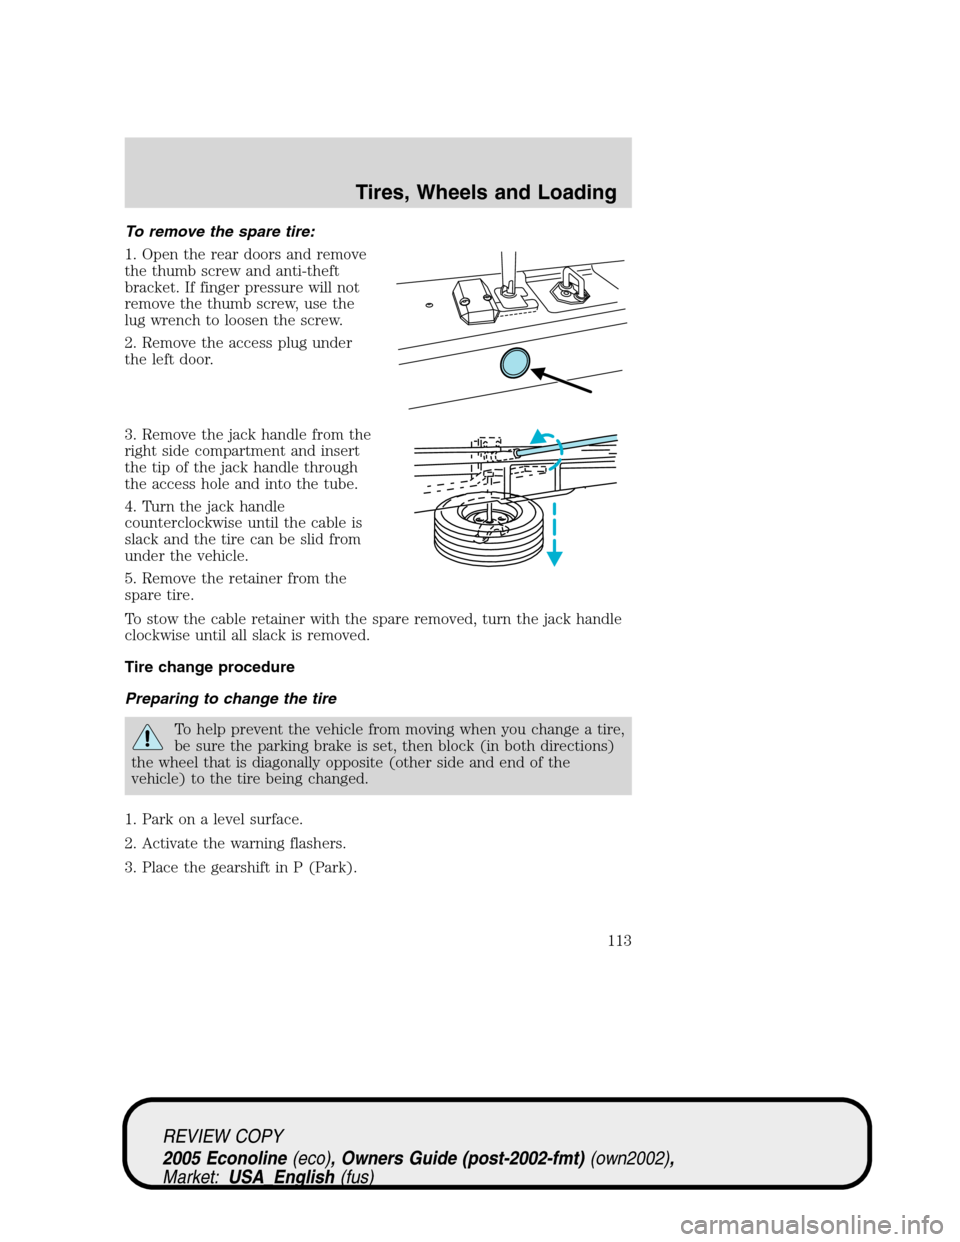 FORD E SERIES 2005 4.G Owners Manual To remove the spare tire:
1. Open the rear doors and remove
the thumb screw and anti-theft
bracket. If finger pressure will not
remove the thumb screw, use the
lug wrench to loosen the screw.
2. Remov